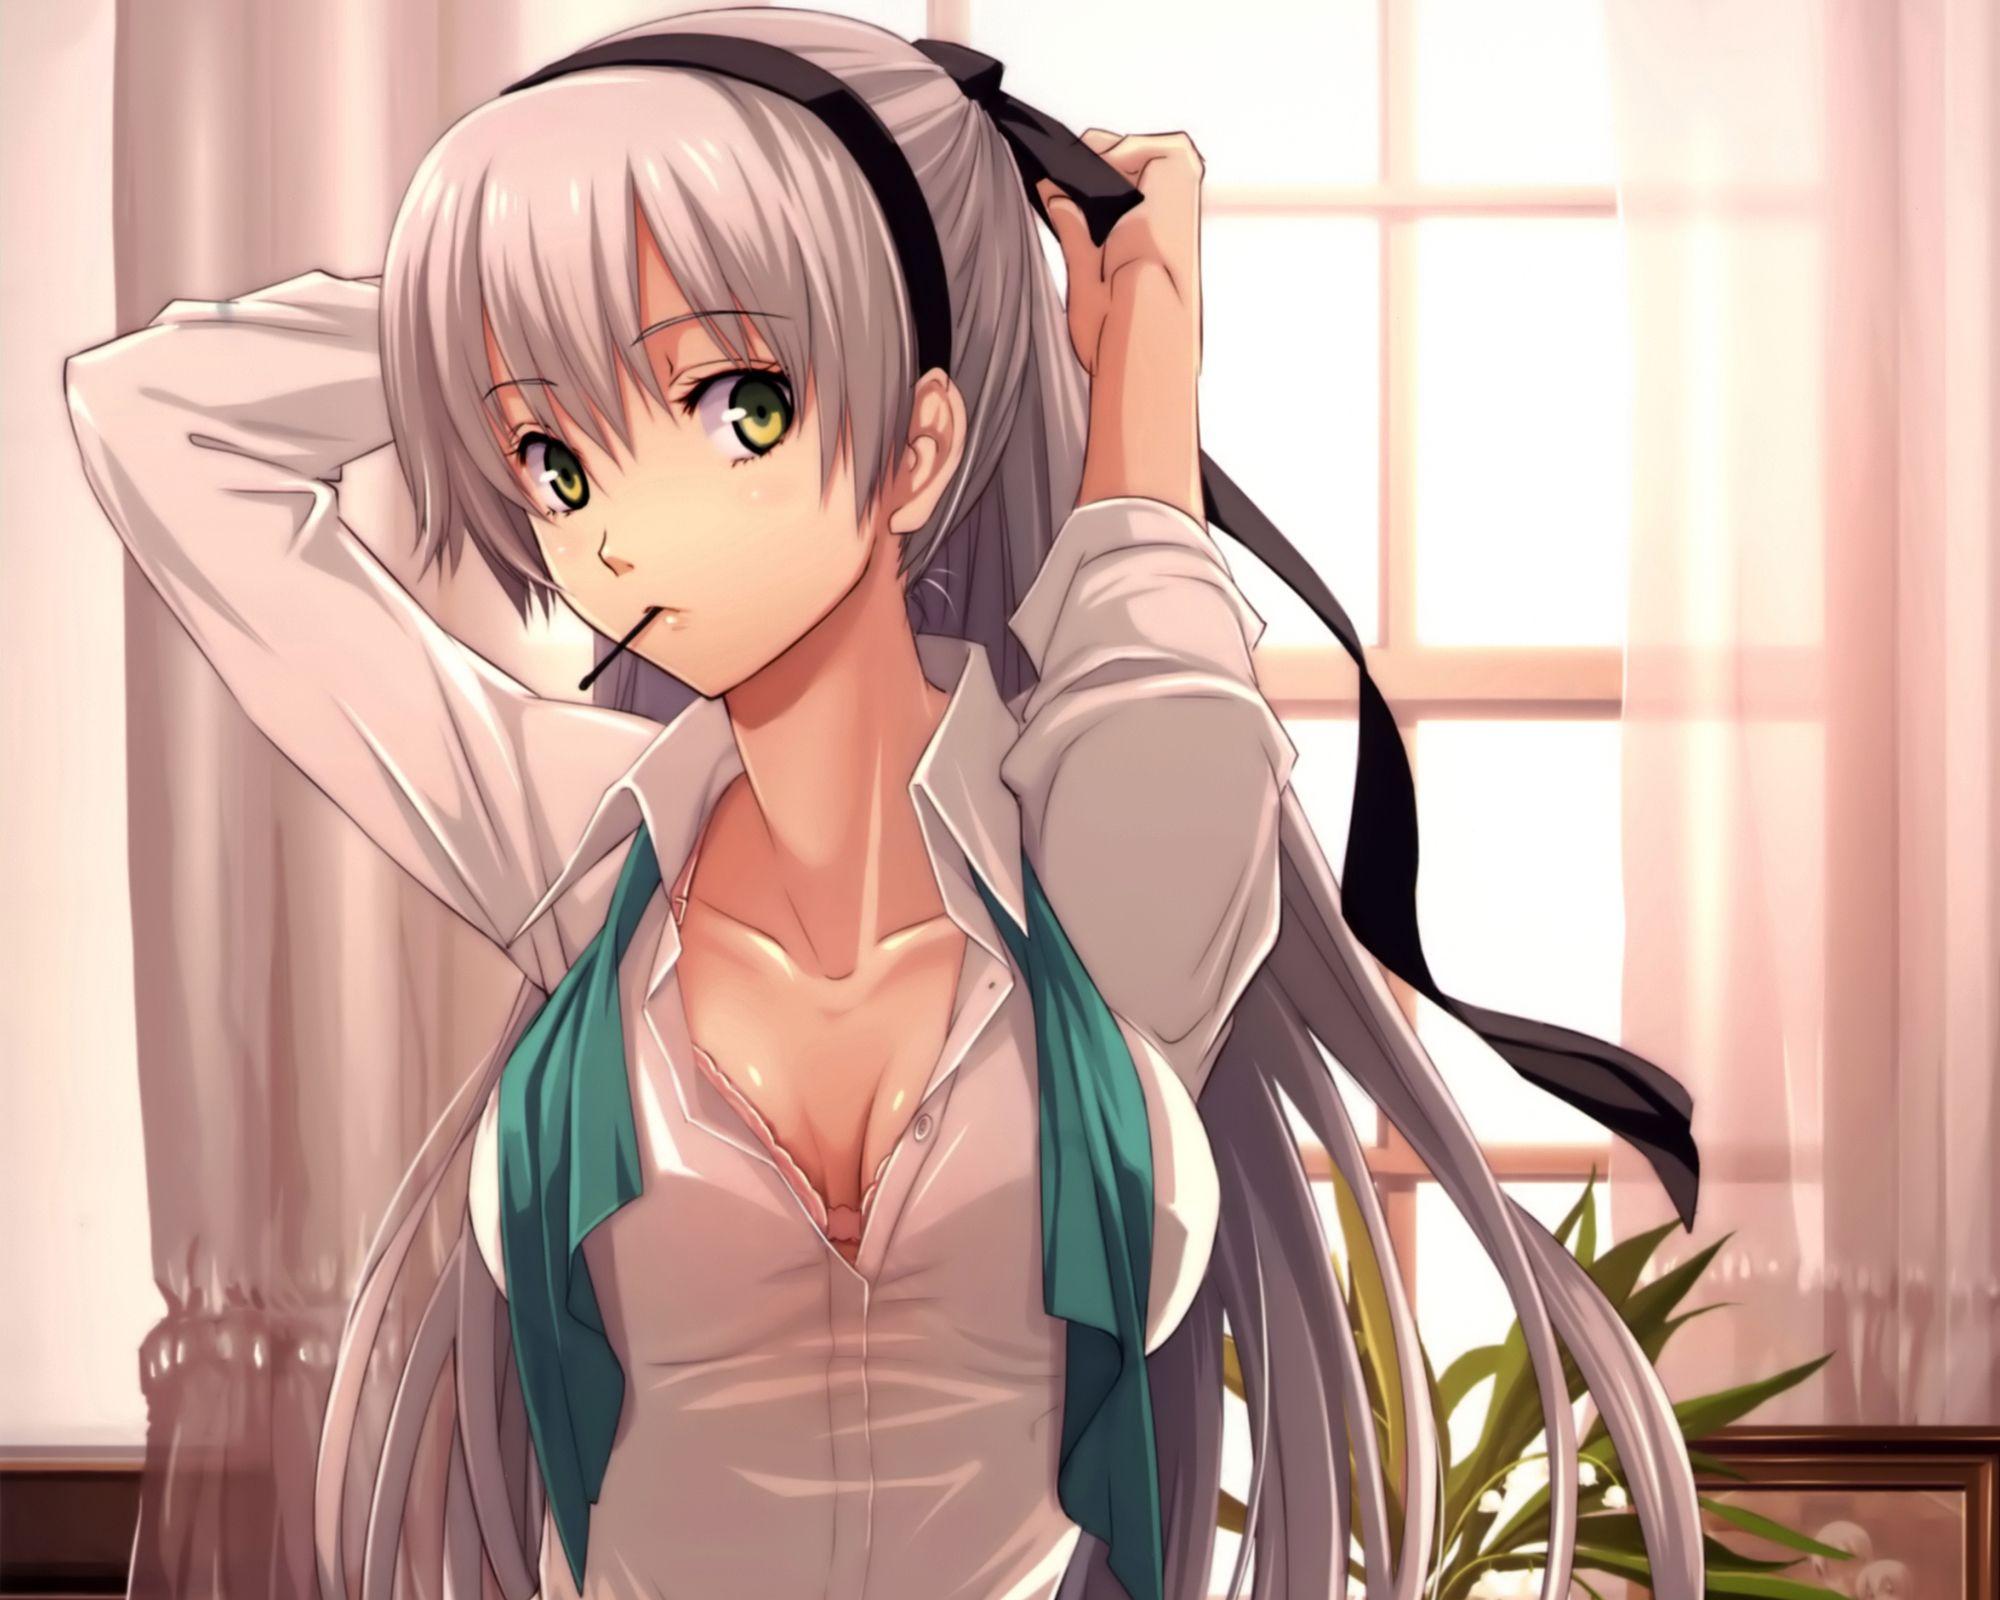 3. Blue-eyed Silver-haired Anime Girl - wide 10